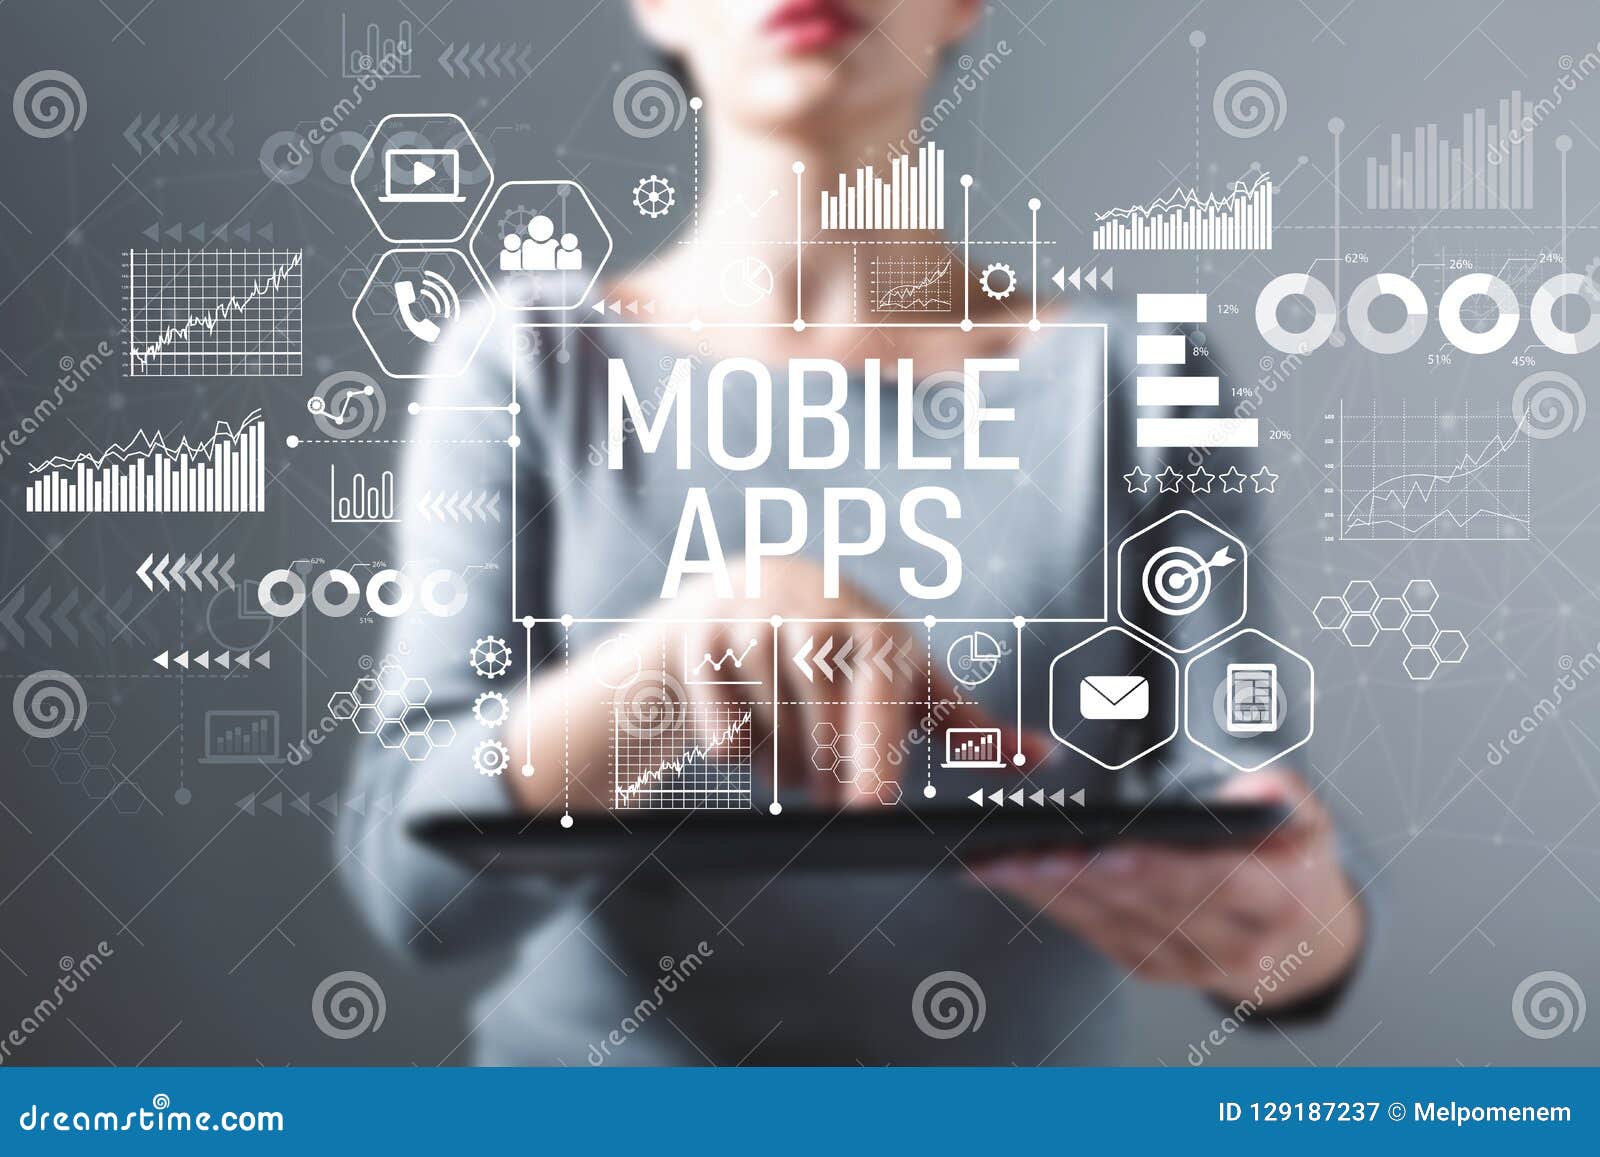 mobile apps with woman using a tablet